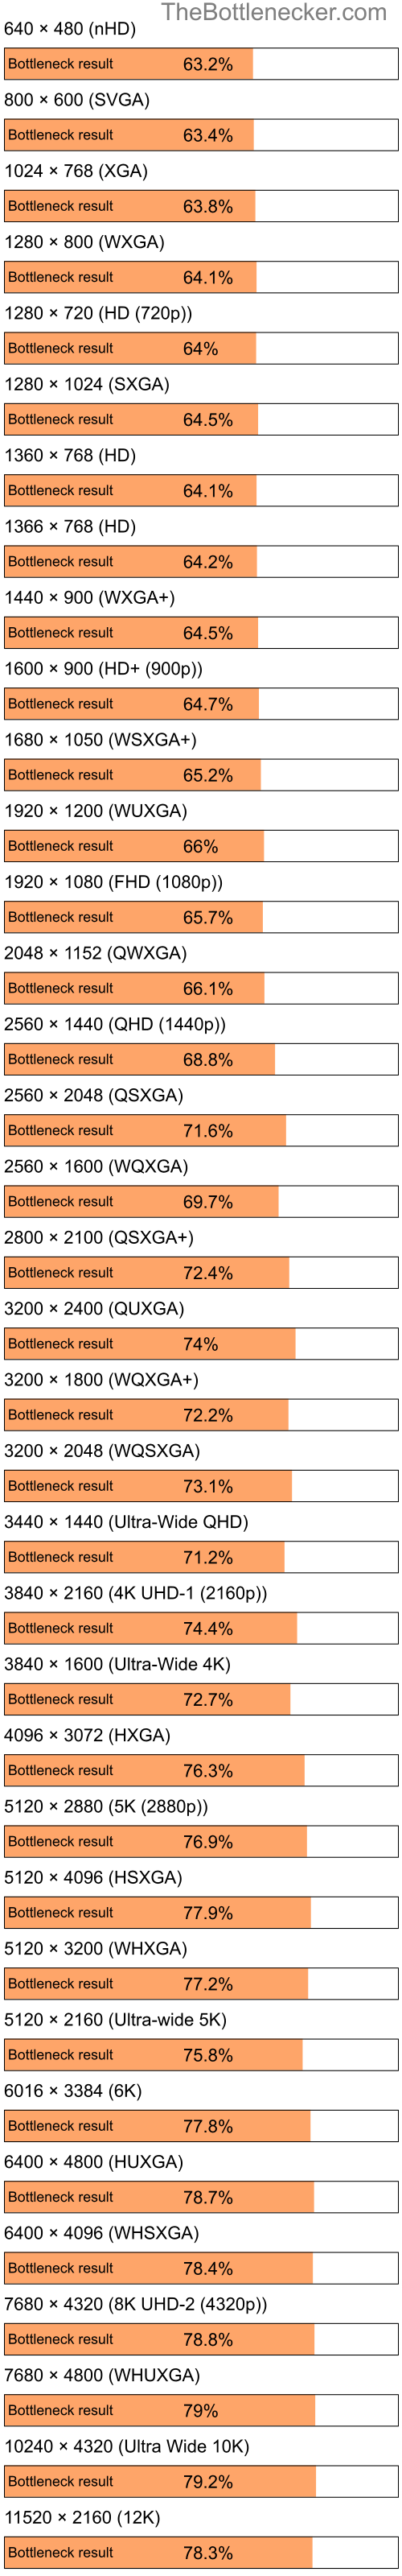 Bottleneck results by resolution for Intel Celeron and AMD Mobility Radeon X1600 in General Tasks